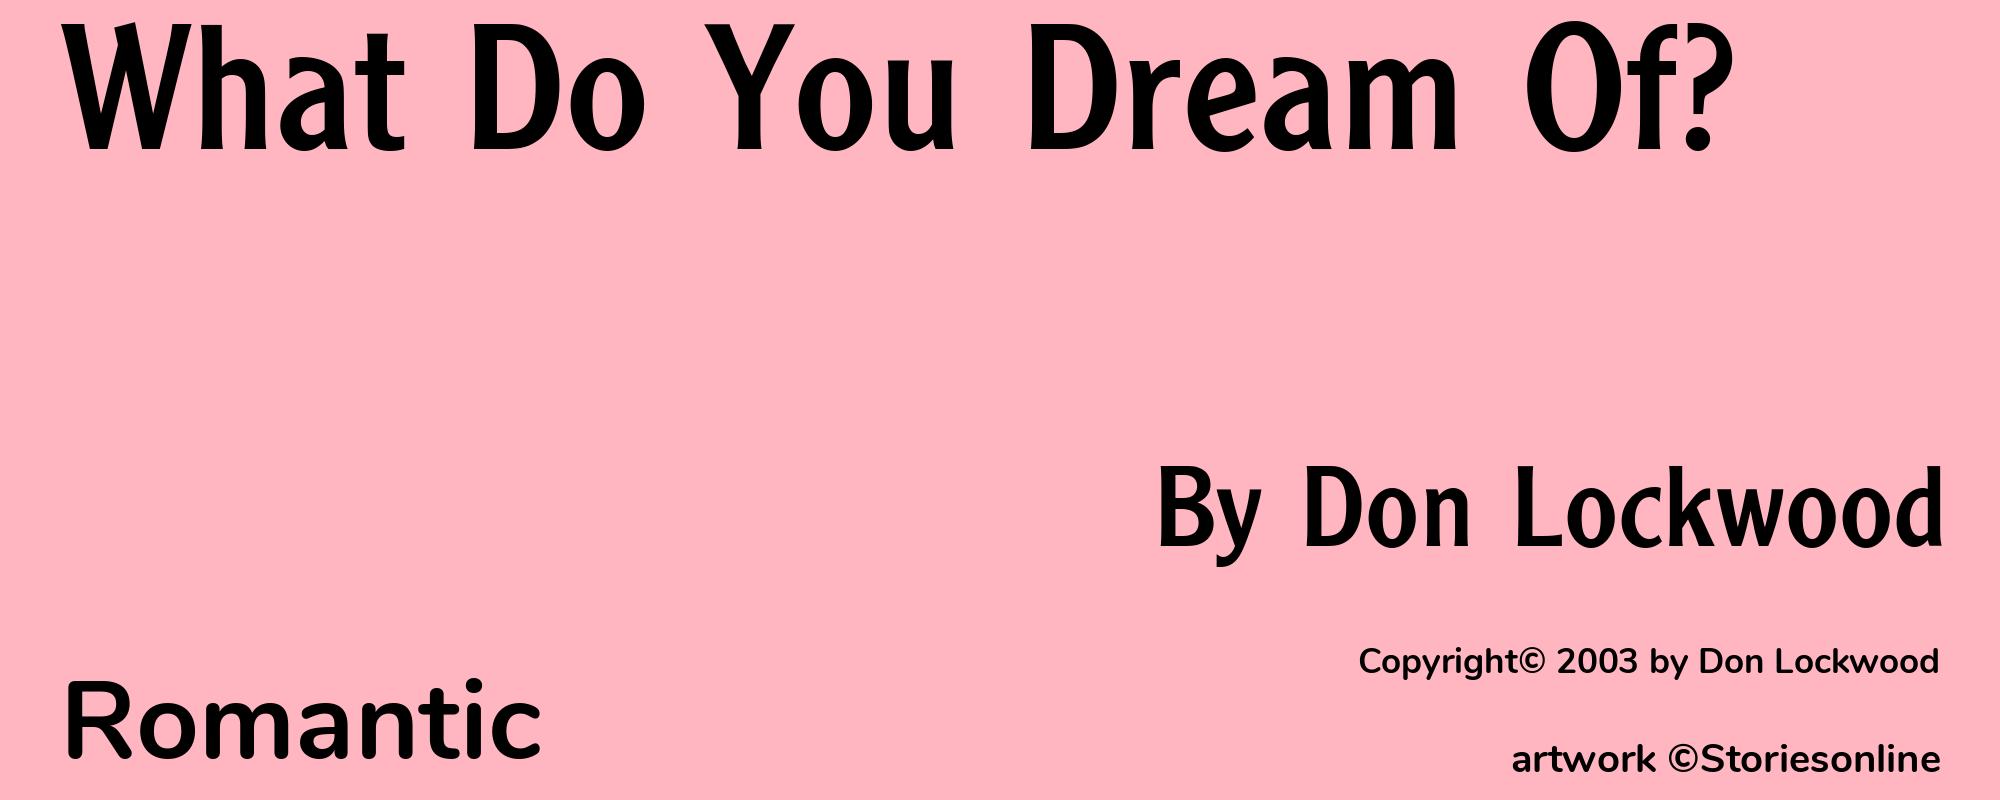 What Do You Dream Of? - Cover